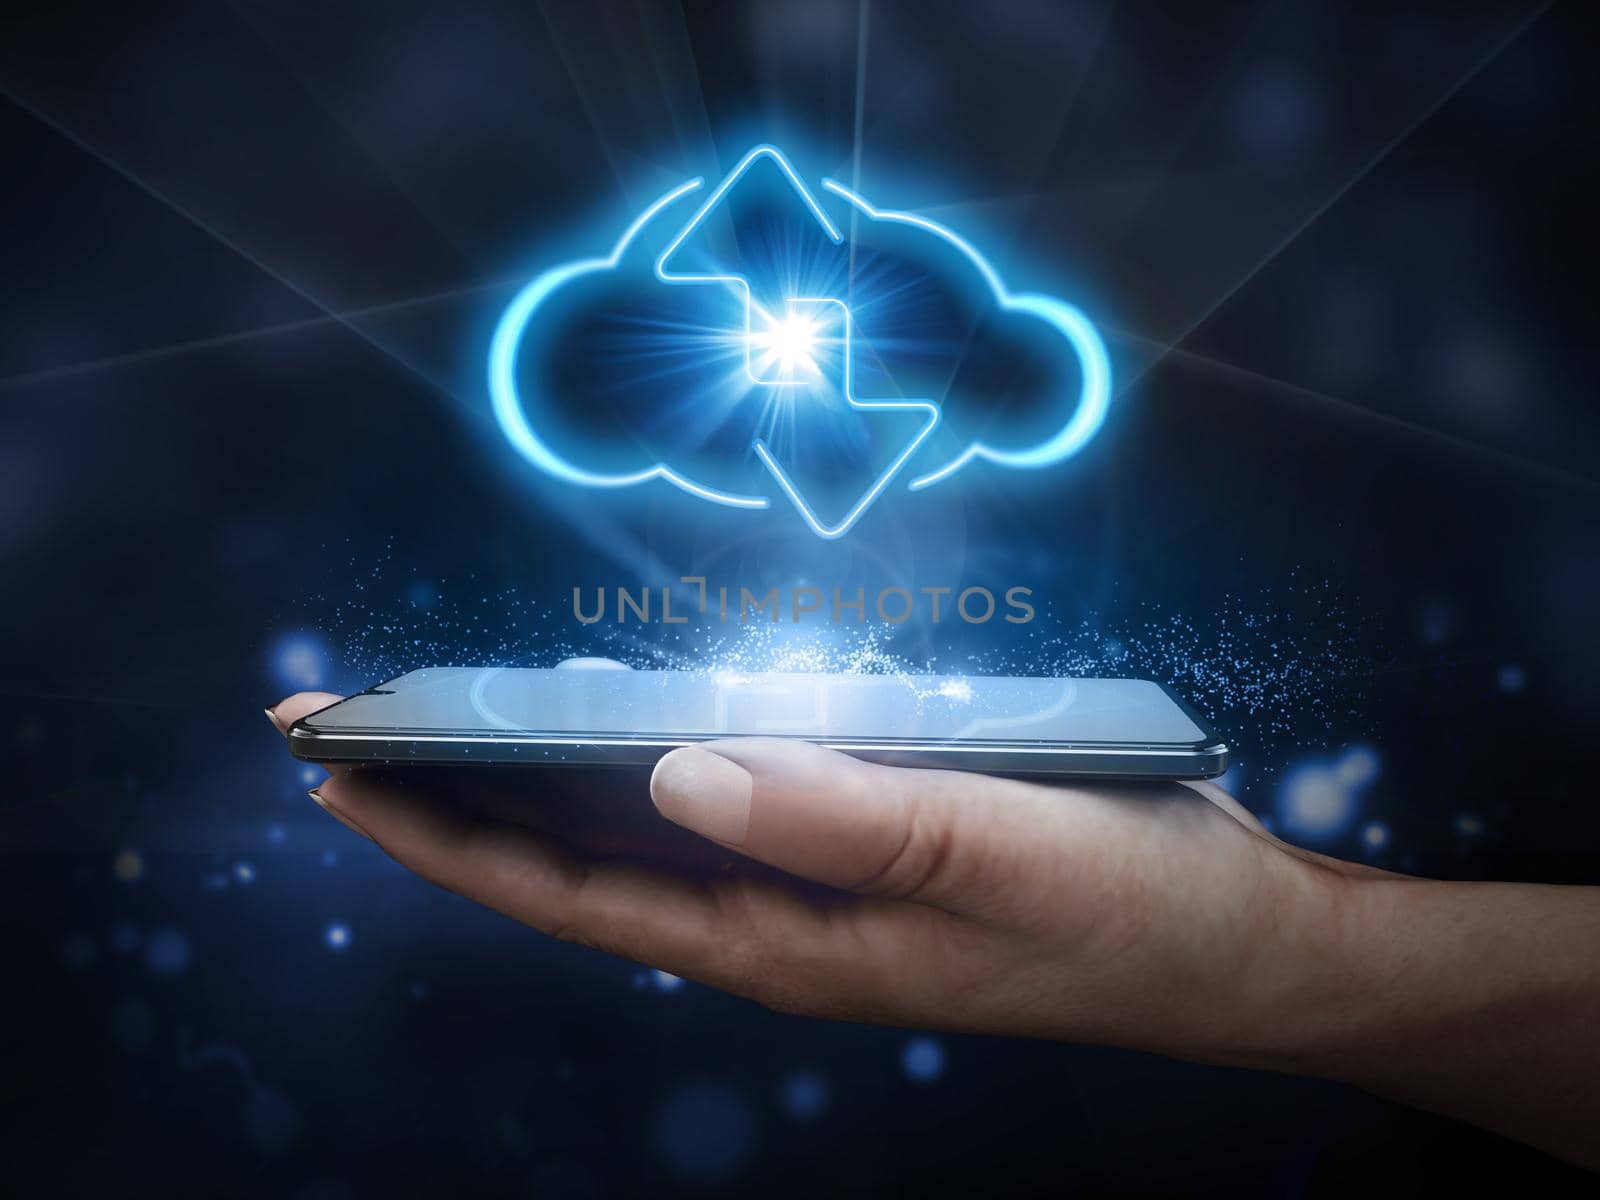 Cloud shape and download upload arrows on smartphone in hand. 3D illustration by Simsek